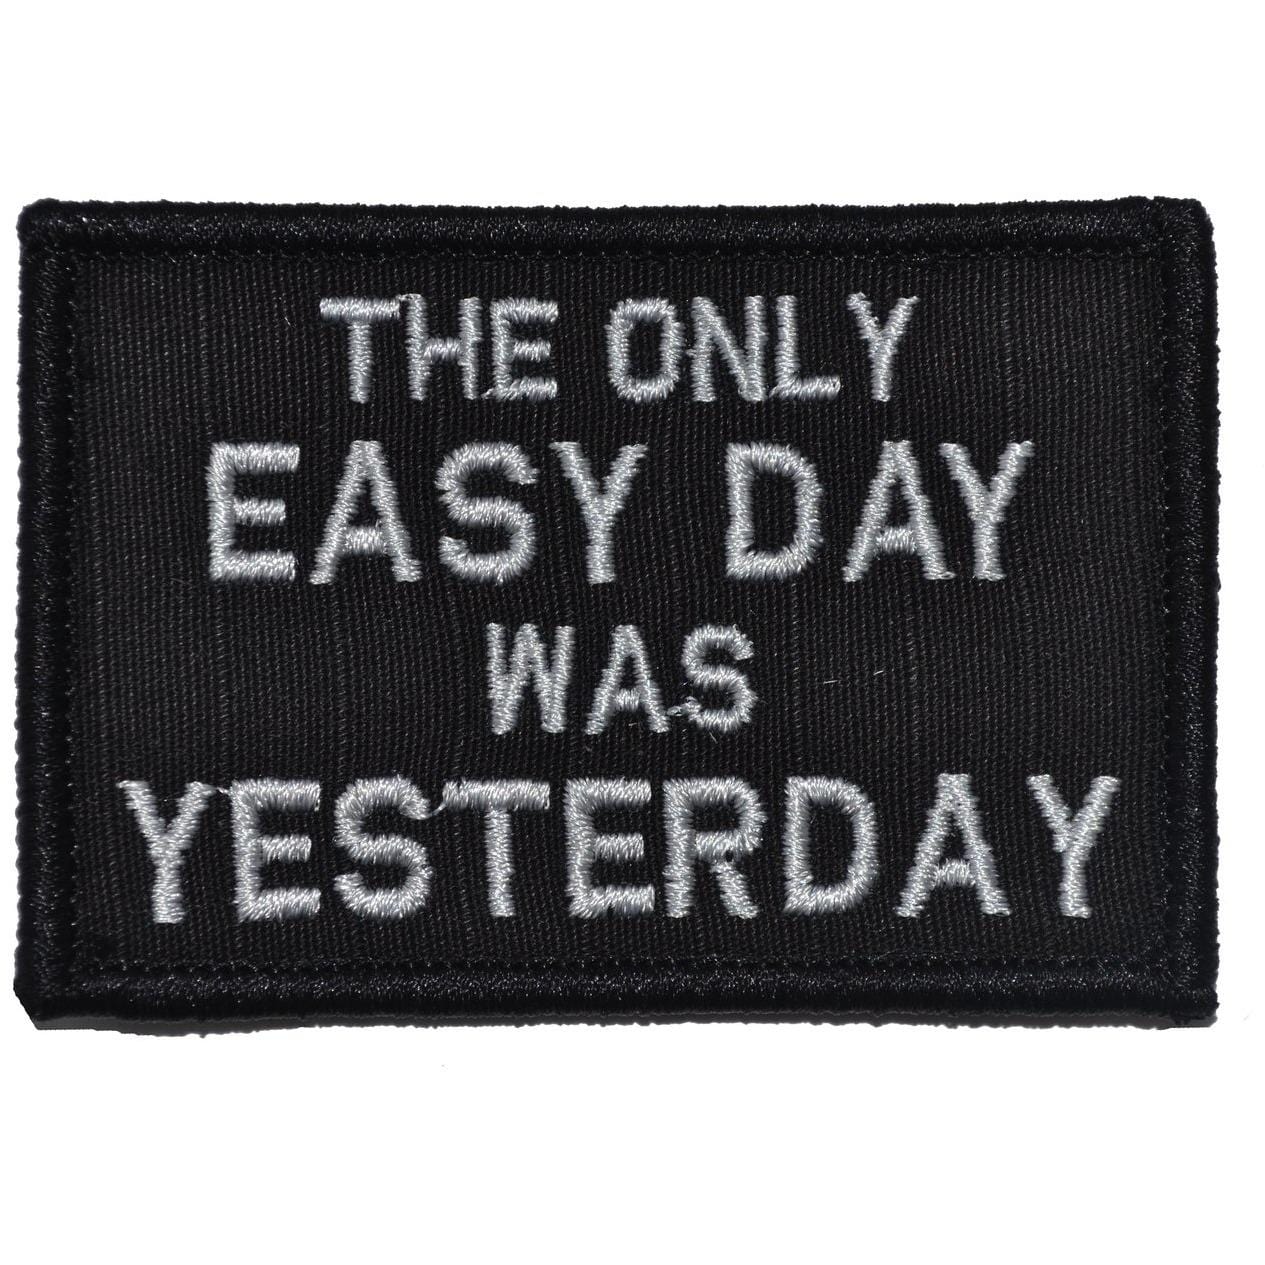 Tactical Gear Junkie Patches Black The Only Easy Day Was Yesterday, Navy Seal Motto - 2x3 Patch